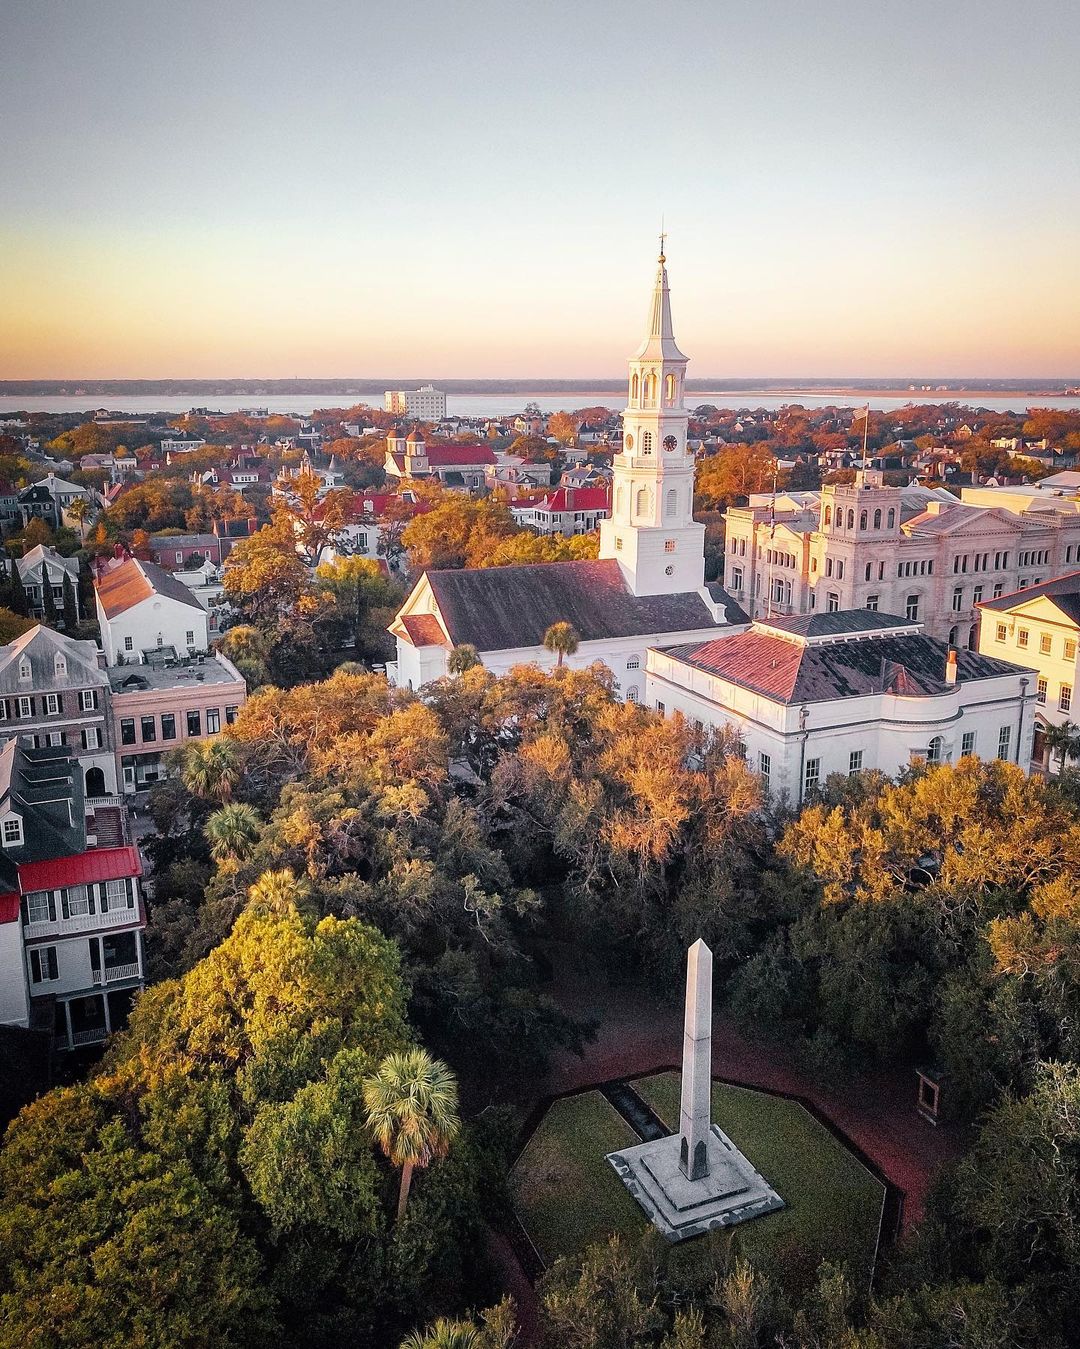 View of Downtown Charleston, SC at Dusk. Photo by Instagram user @mikehabat